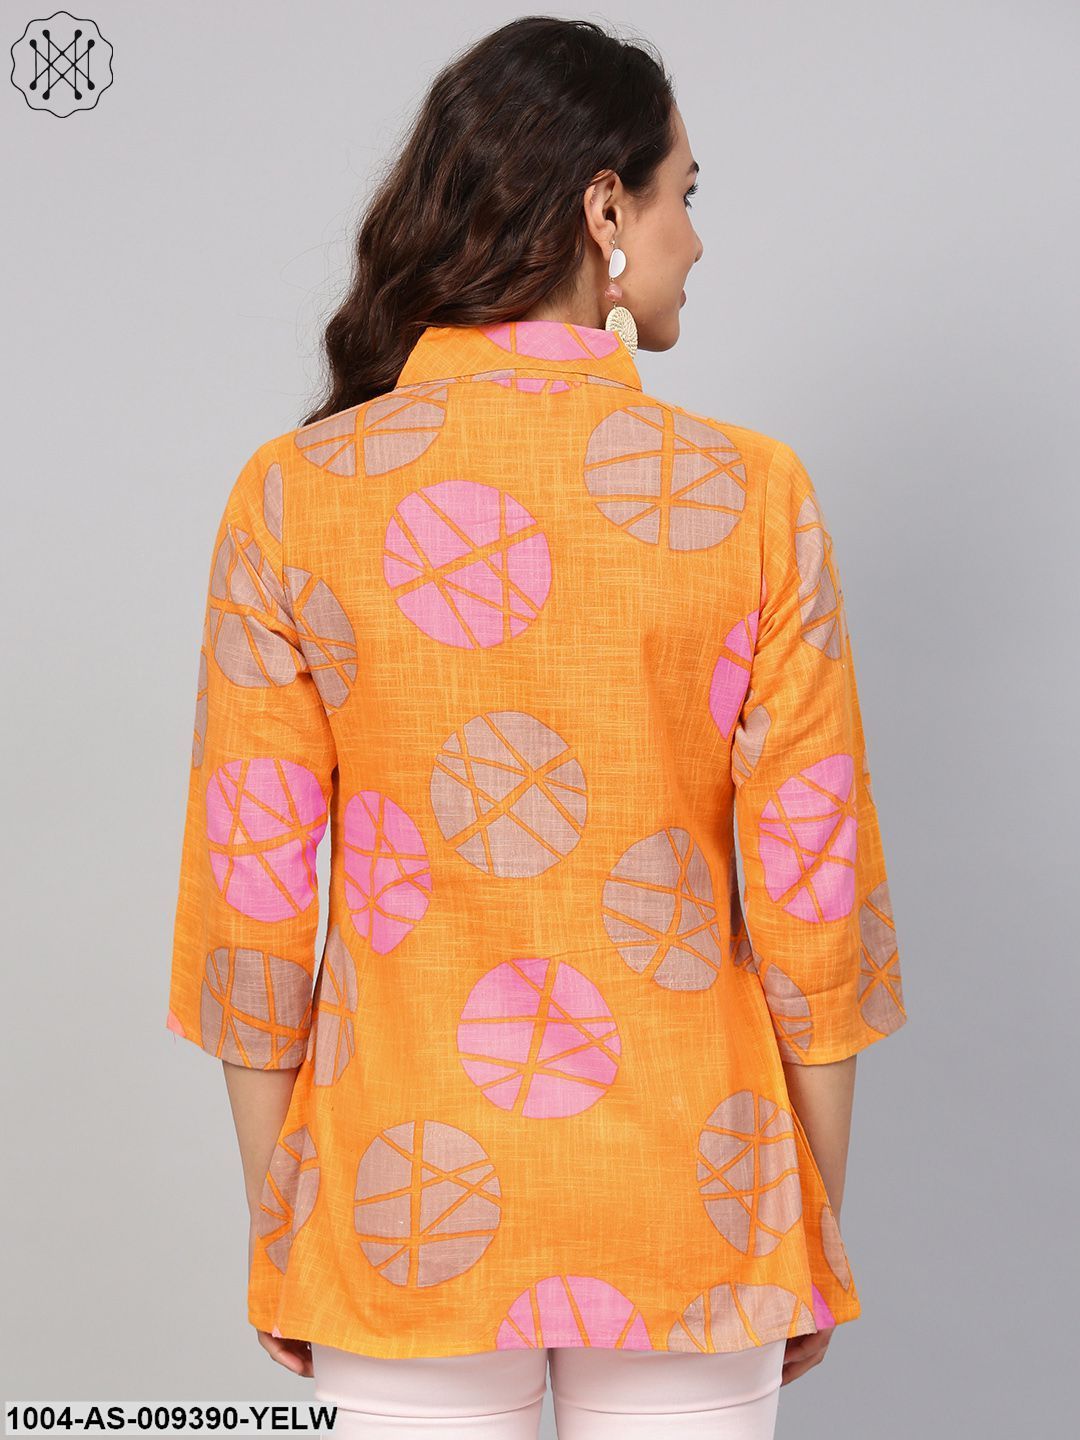 Geometric Printed Yellow Cotton Tunic With Side Placket & 3/4 Sleeves